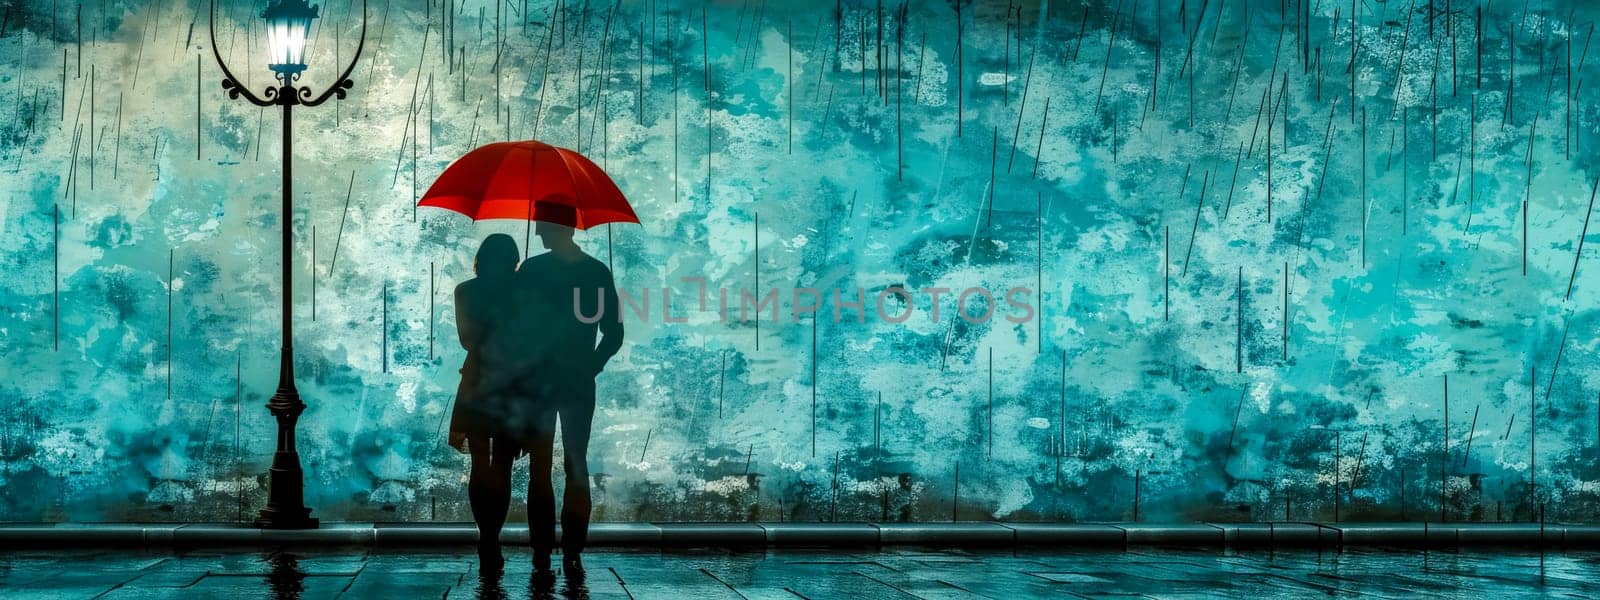 A romantic silhouette of a couple sharing an umbrella by the streetlight on a rainy evening